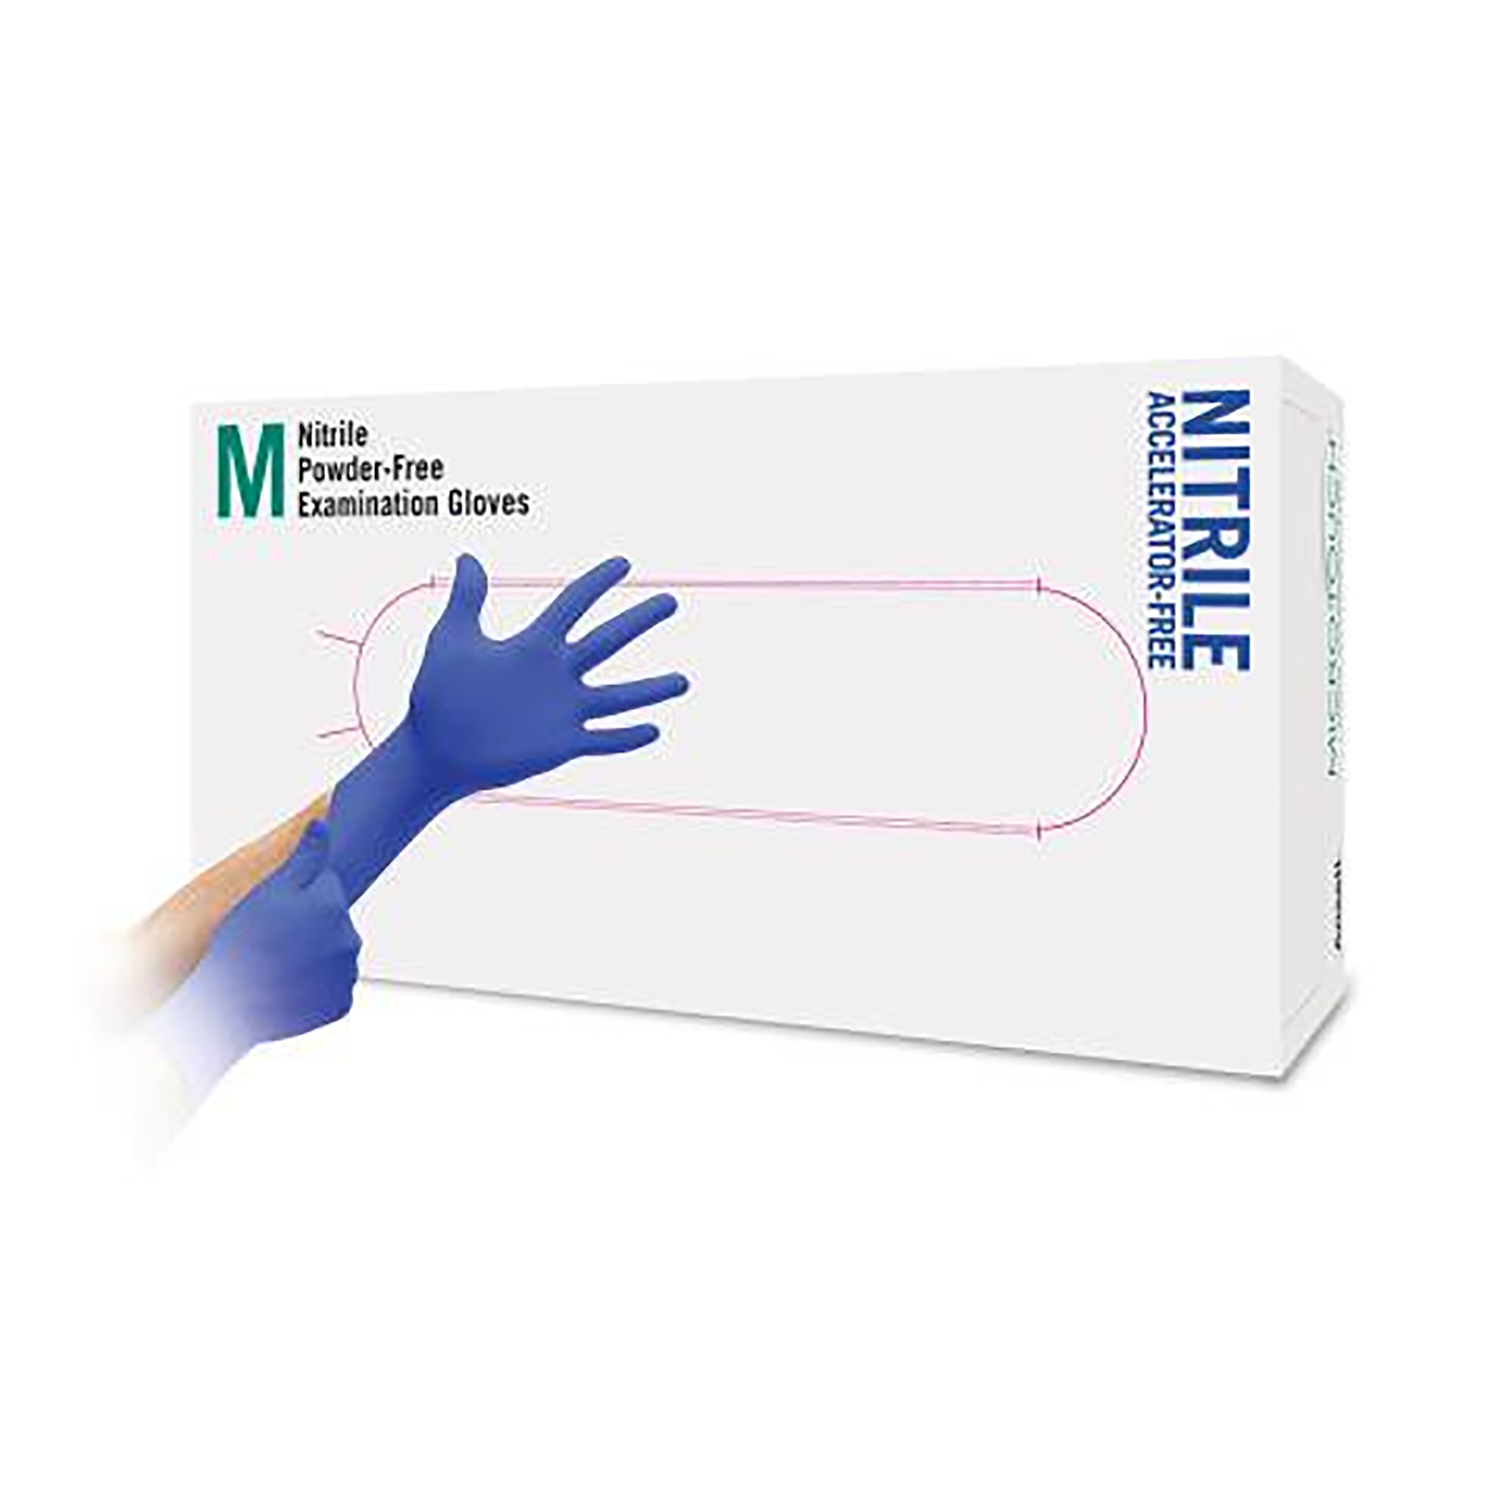 Microtouch AF Nitrile Exam Gloves | Pack of 100 Pieces (2)